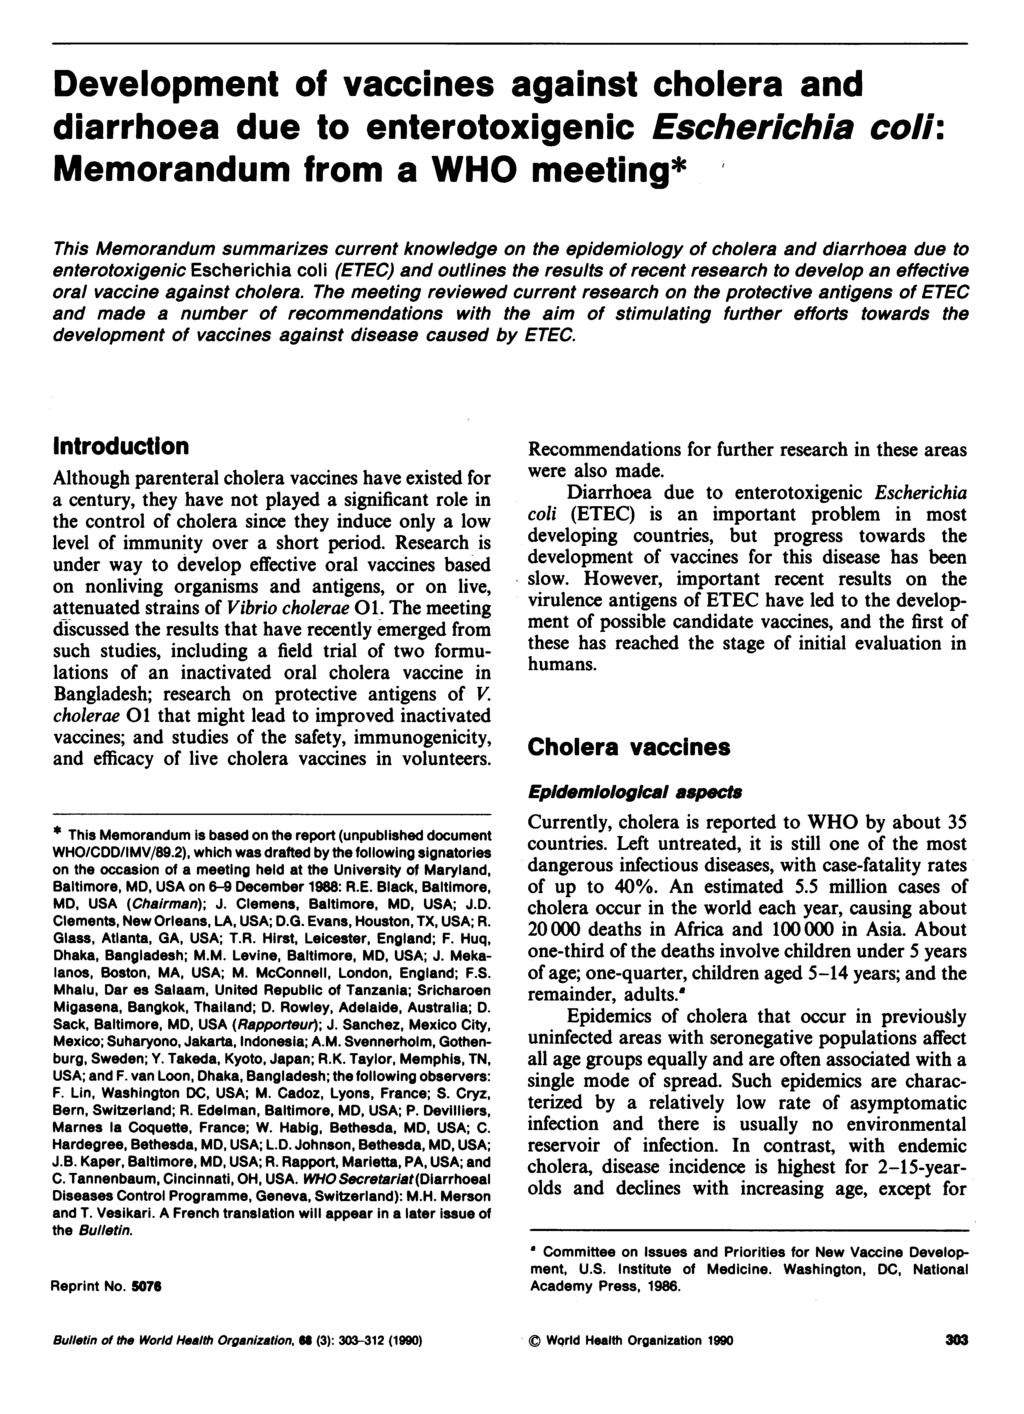 Development of vaccines against cholera and diarrhoea due to enterotoxigenic Escherichia coil: Memorandum from a WHO meeting* This Memorandum summarizes current knowledge on the epidemiology of